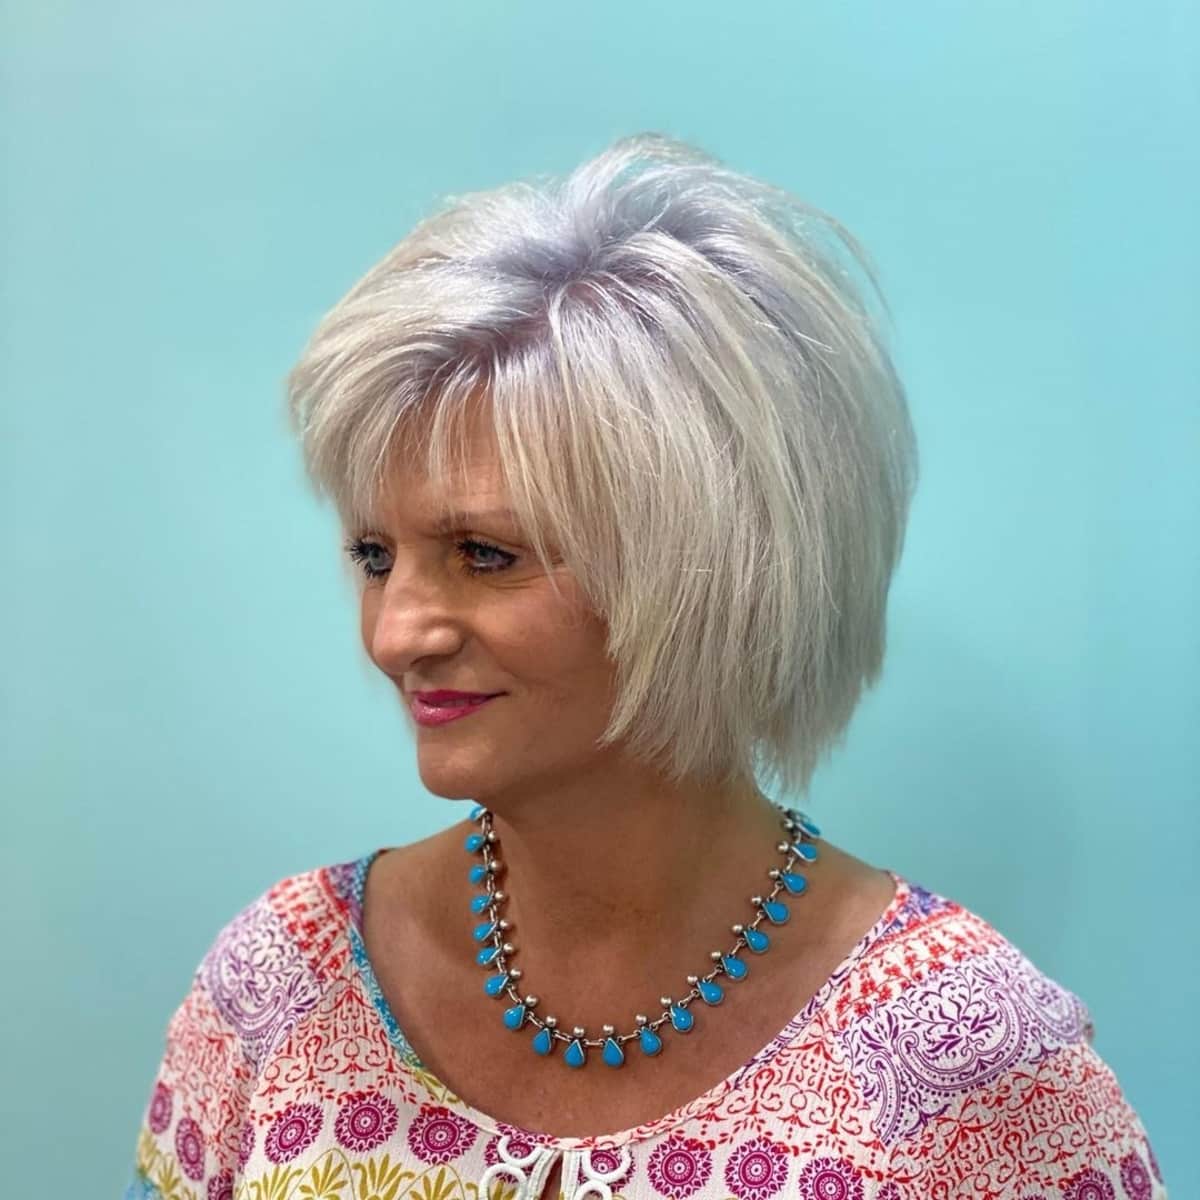 Edgy chin-length shag for an older woman over the age of 50